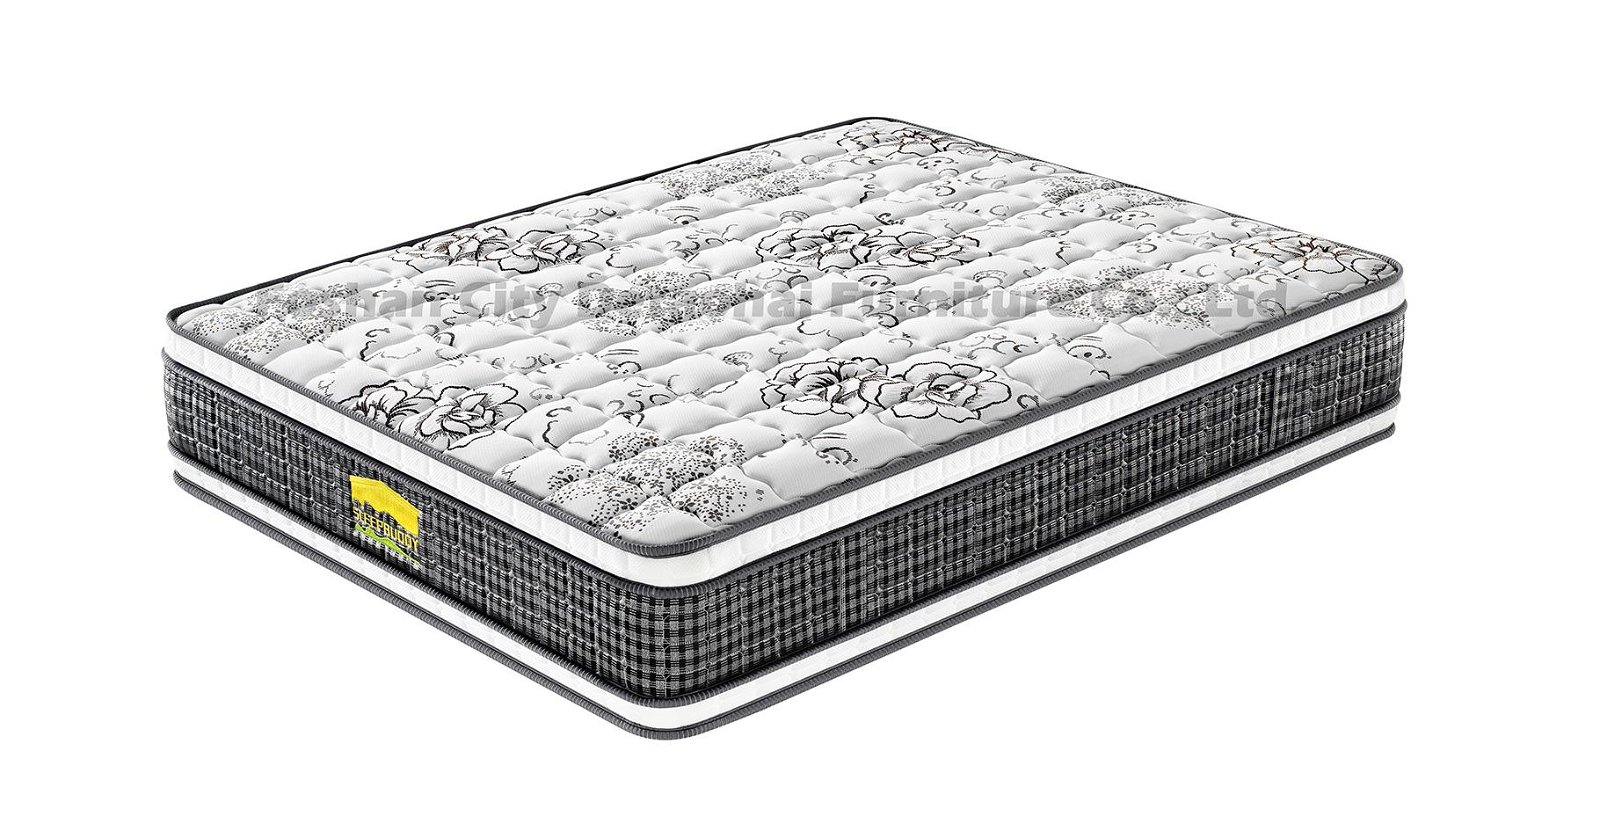 Double sided use pocket spring mattress with high quality 2